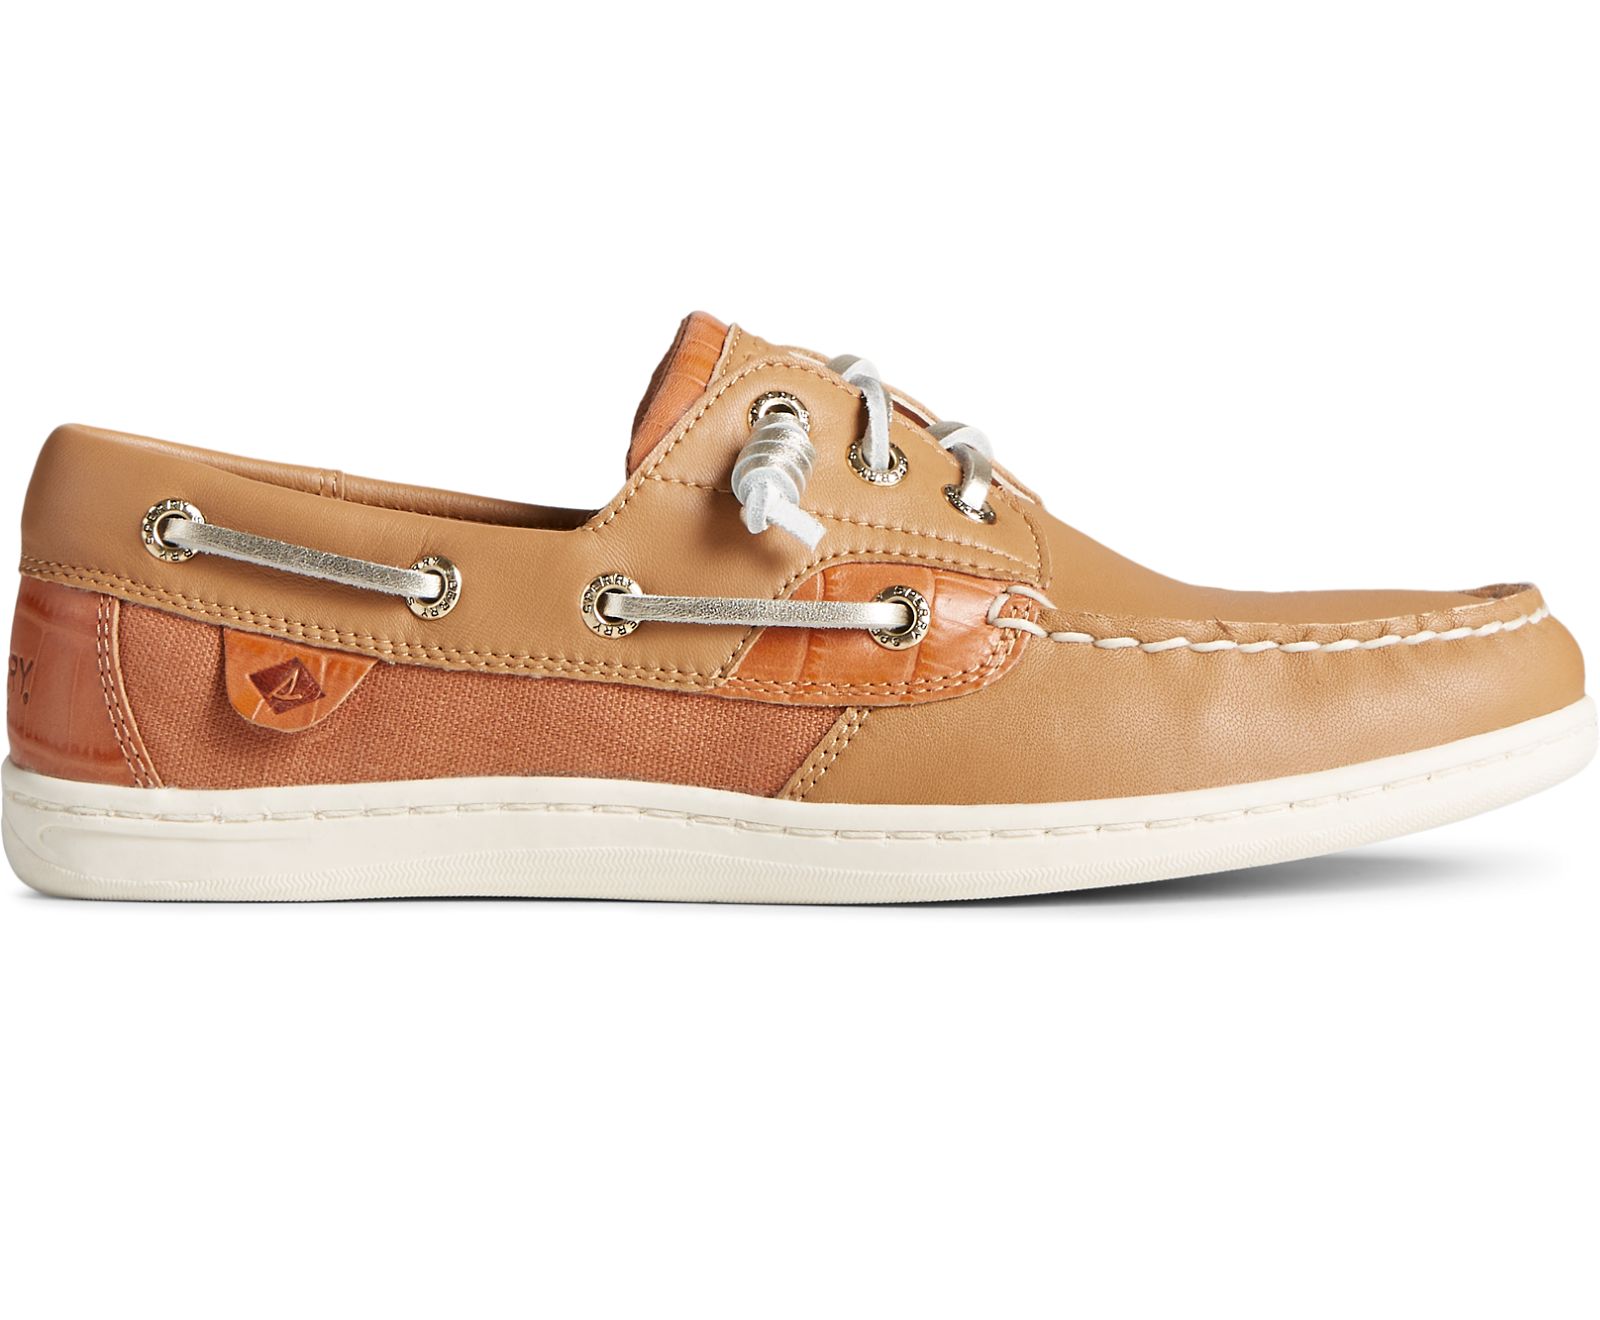 Women's Songfish Croc Leather Boat Shoe - Tan - Click Image to Close